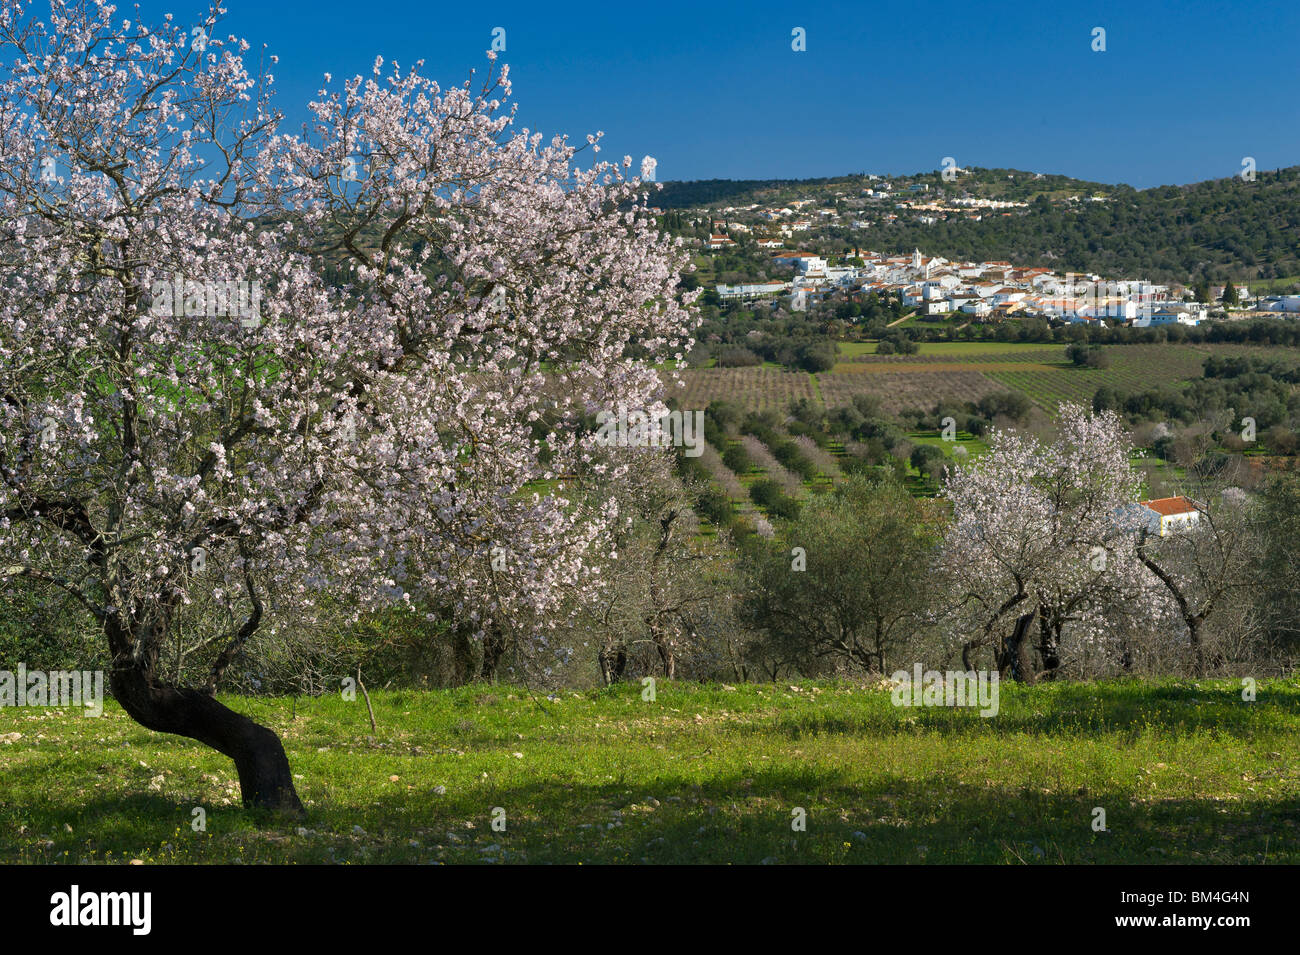 Portugal, The Algarve, Paderne, Inland Village With Almond Blossom In The Countryside Stock Photo